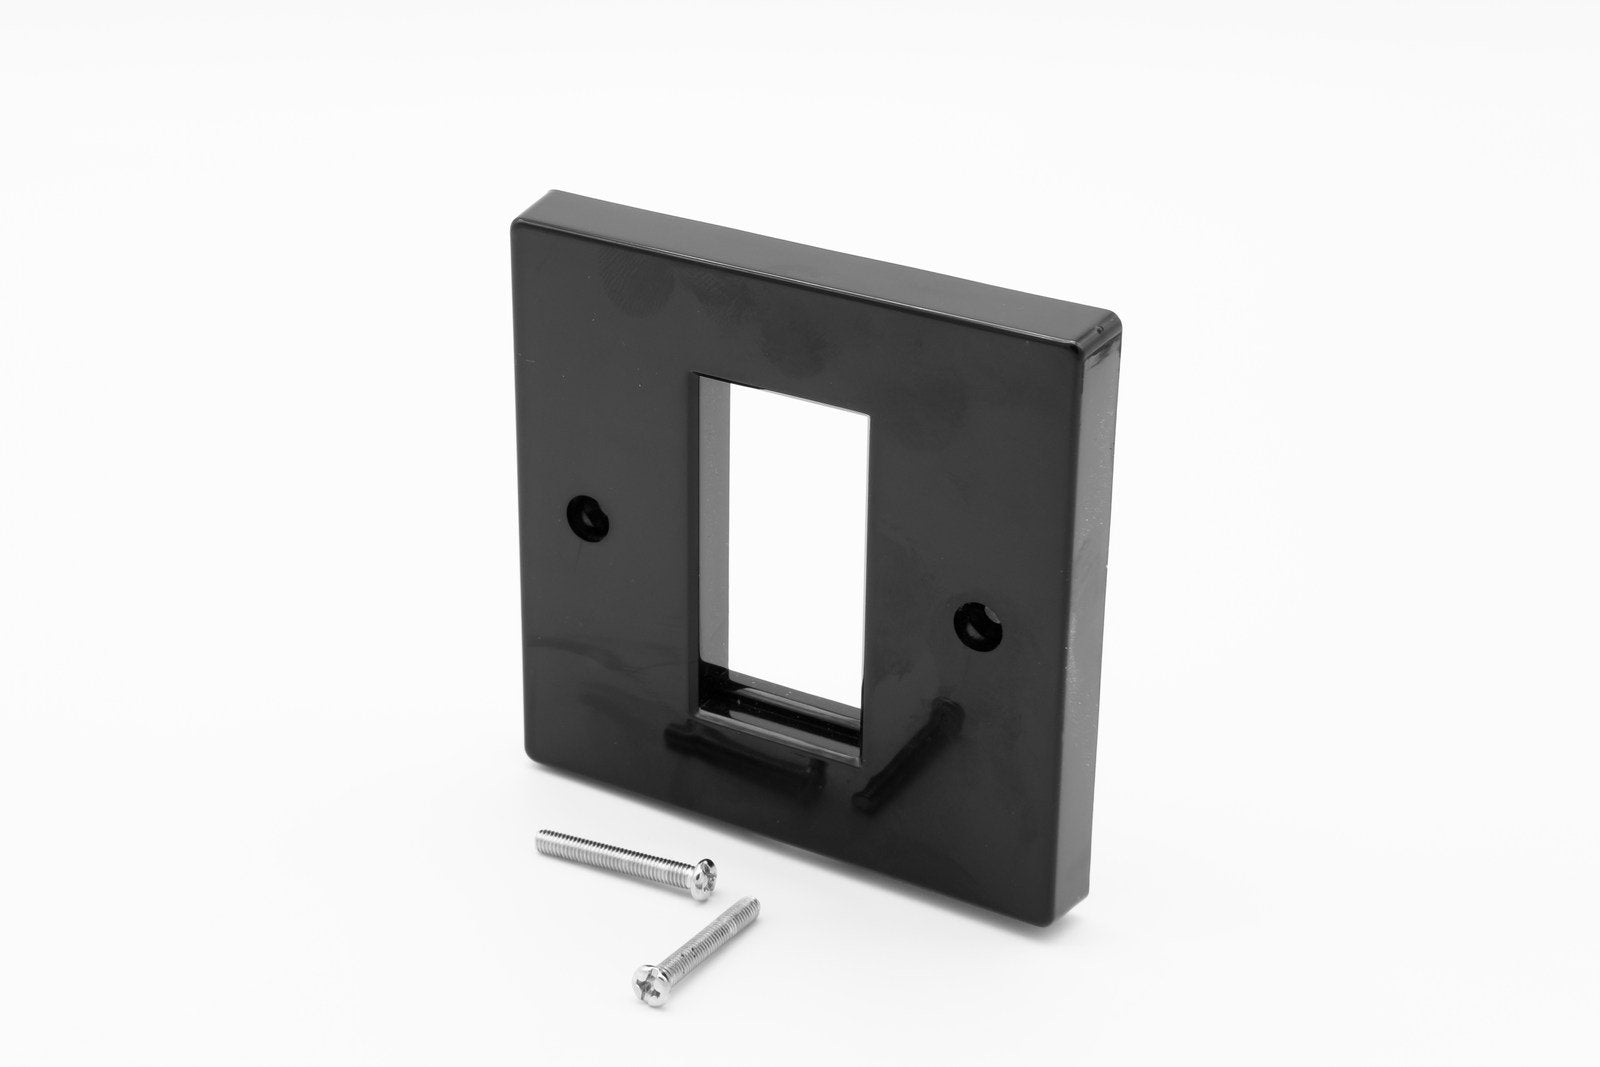 LOW PROFILE SINGLE GANG (1 SLOT) FACEPLATE FOR 1 X EURO MODULES - BLACK